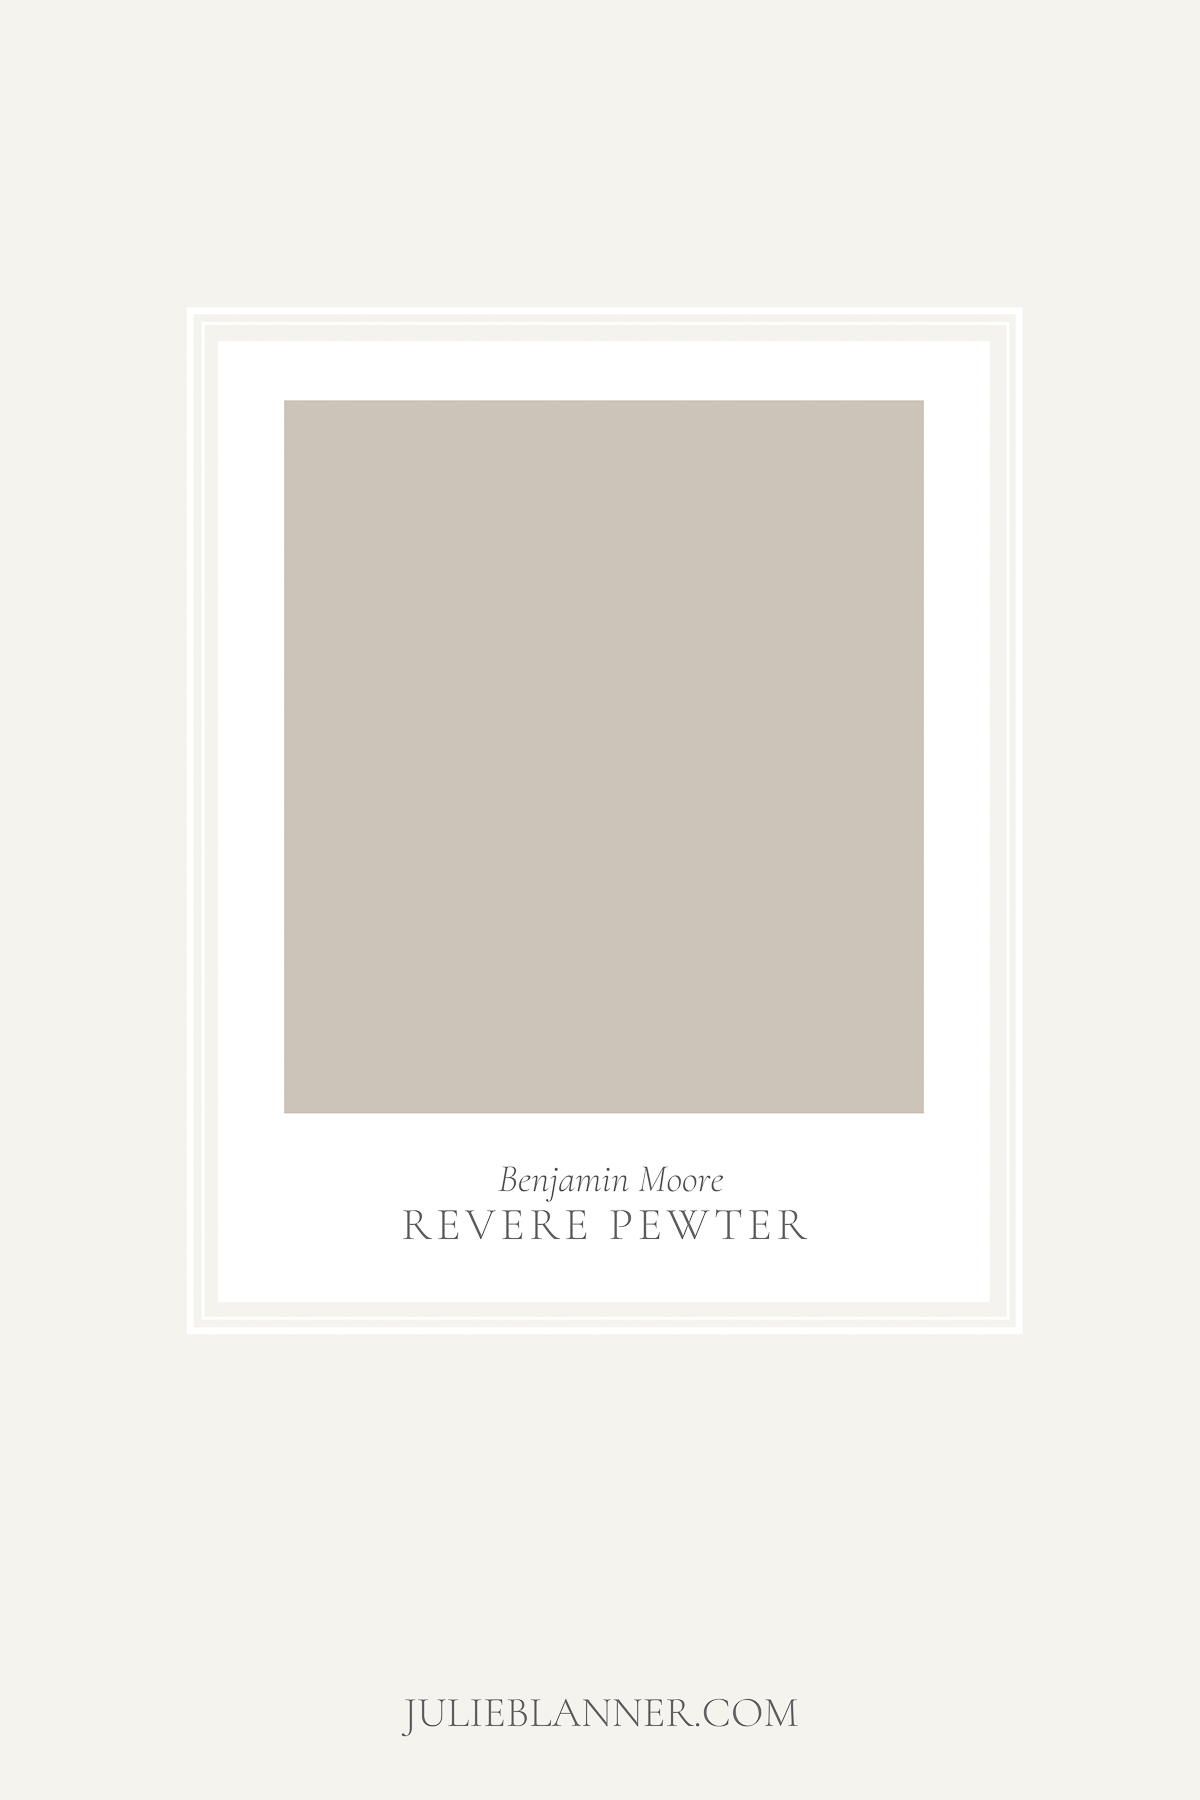 A graphic featuring a paint card for Benjamin Moore Revere Pewter, a deck paint color.